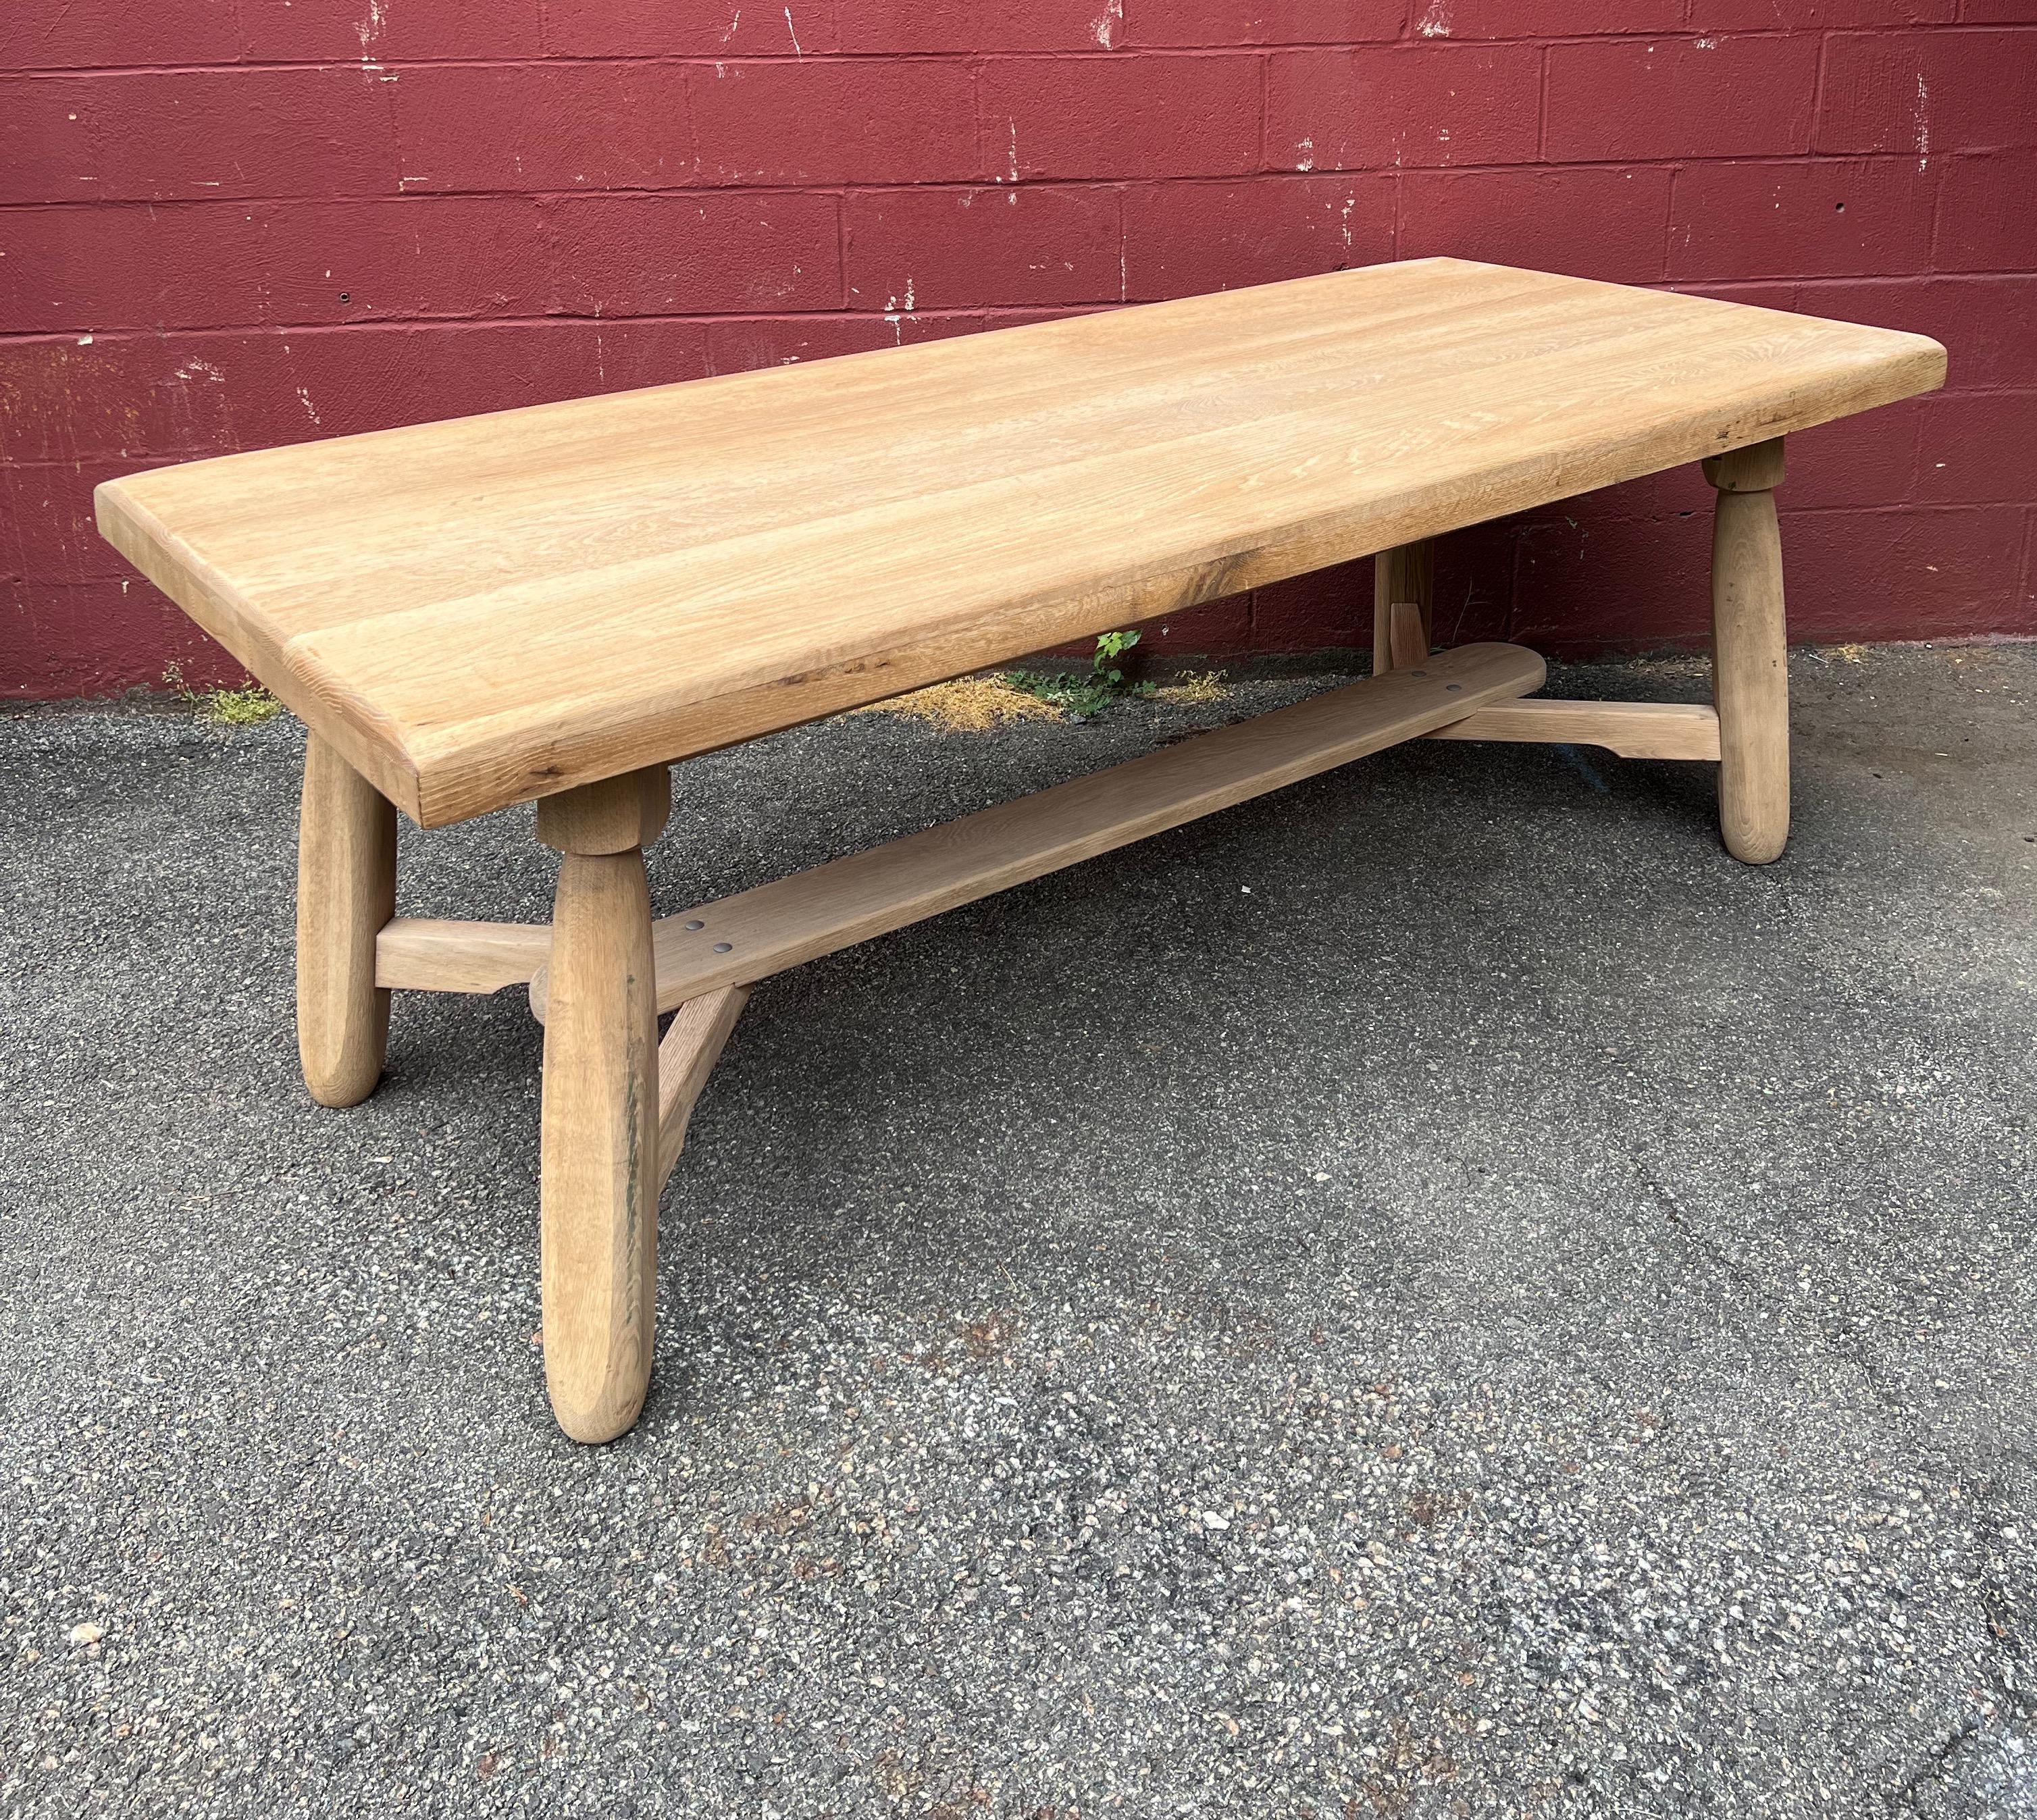 An unusual French dining or library table with a solid thick top mounted on an interesting base of elongated legs. The table has recently been stripped and bleached and it can be used as is or it can be waxed to give it more luster. Additionally the